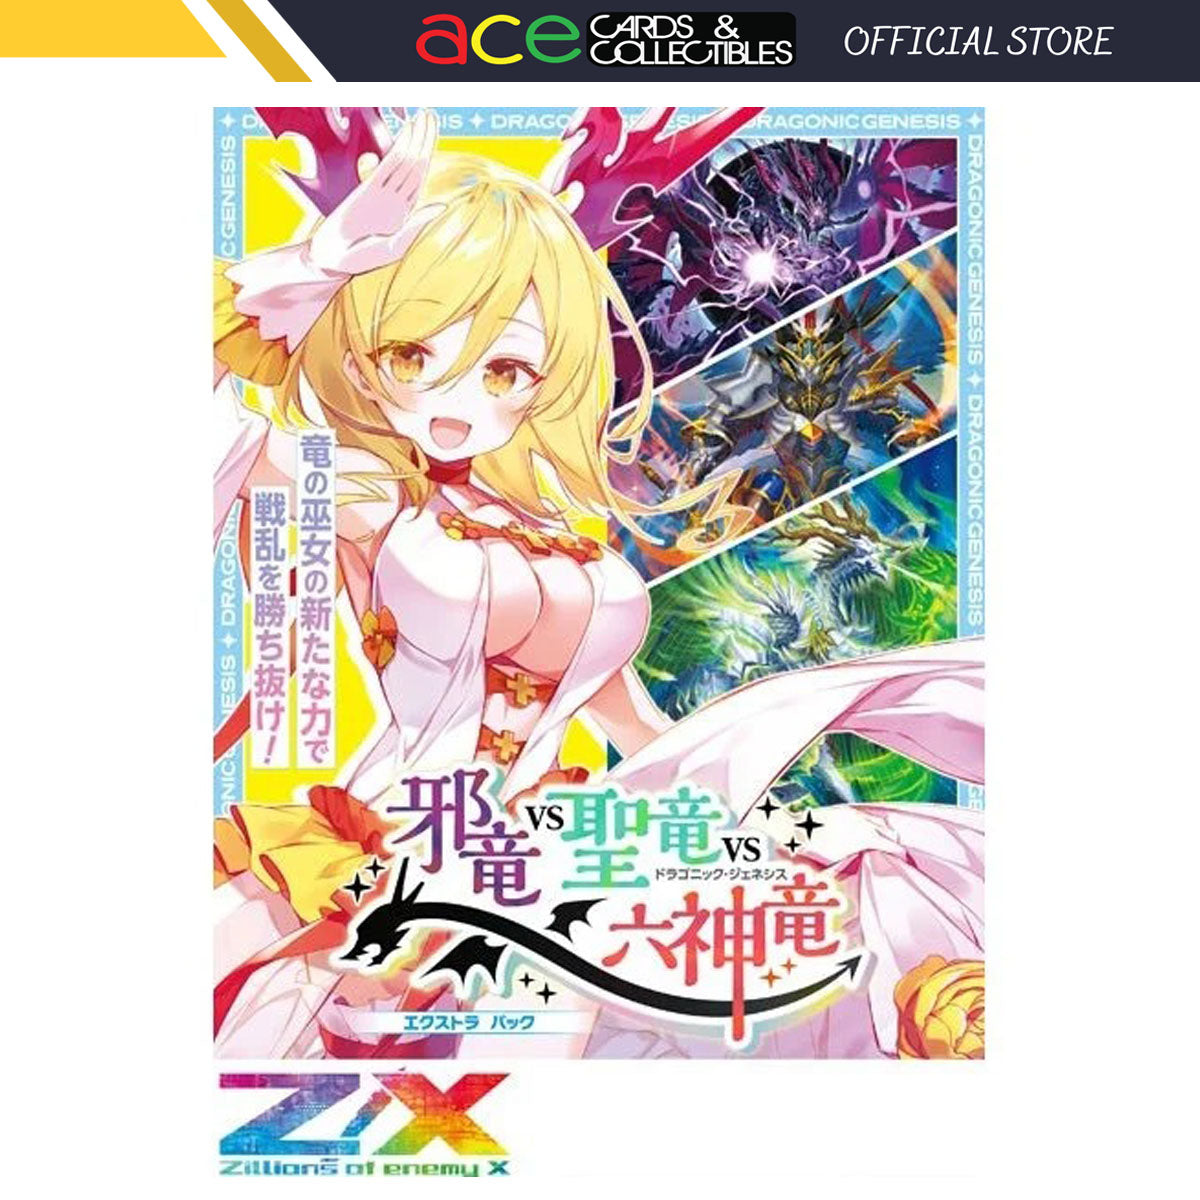 Z/X -Zillions of enemy X- The Extra Pack The 34th "Dragonic Genesis" [ZX-E-34] (Japanese)-EX Pack (Random)-Broccoli-Ace Cards & Collectibles